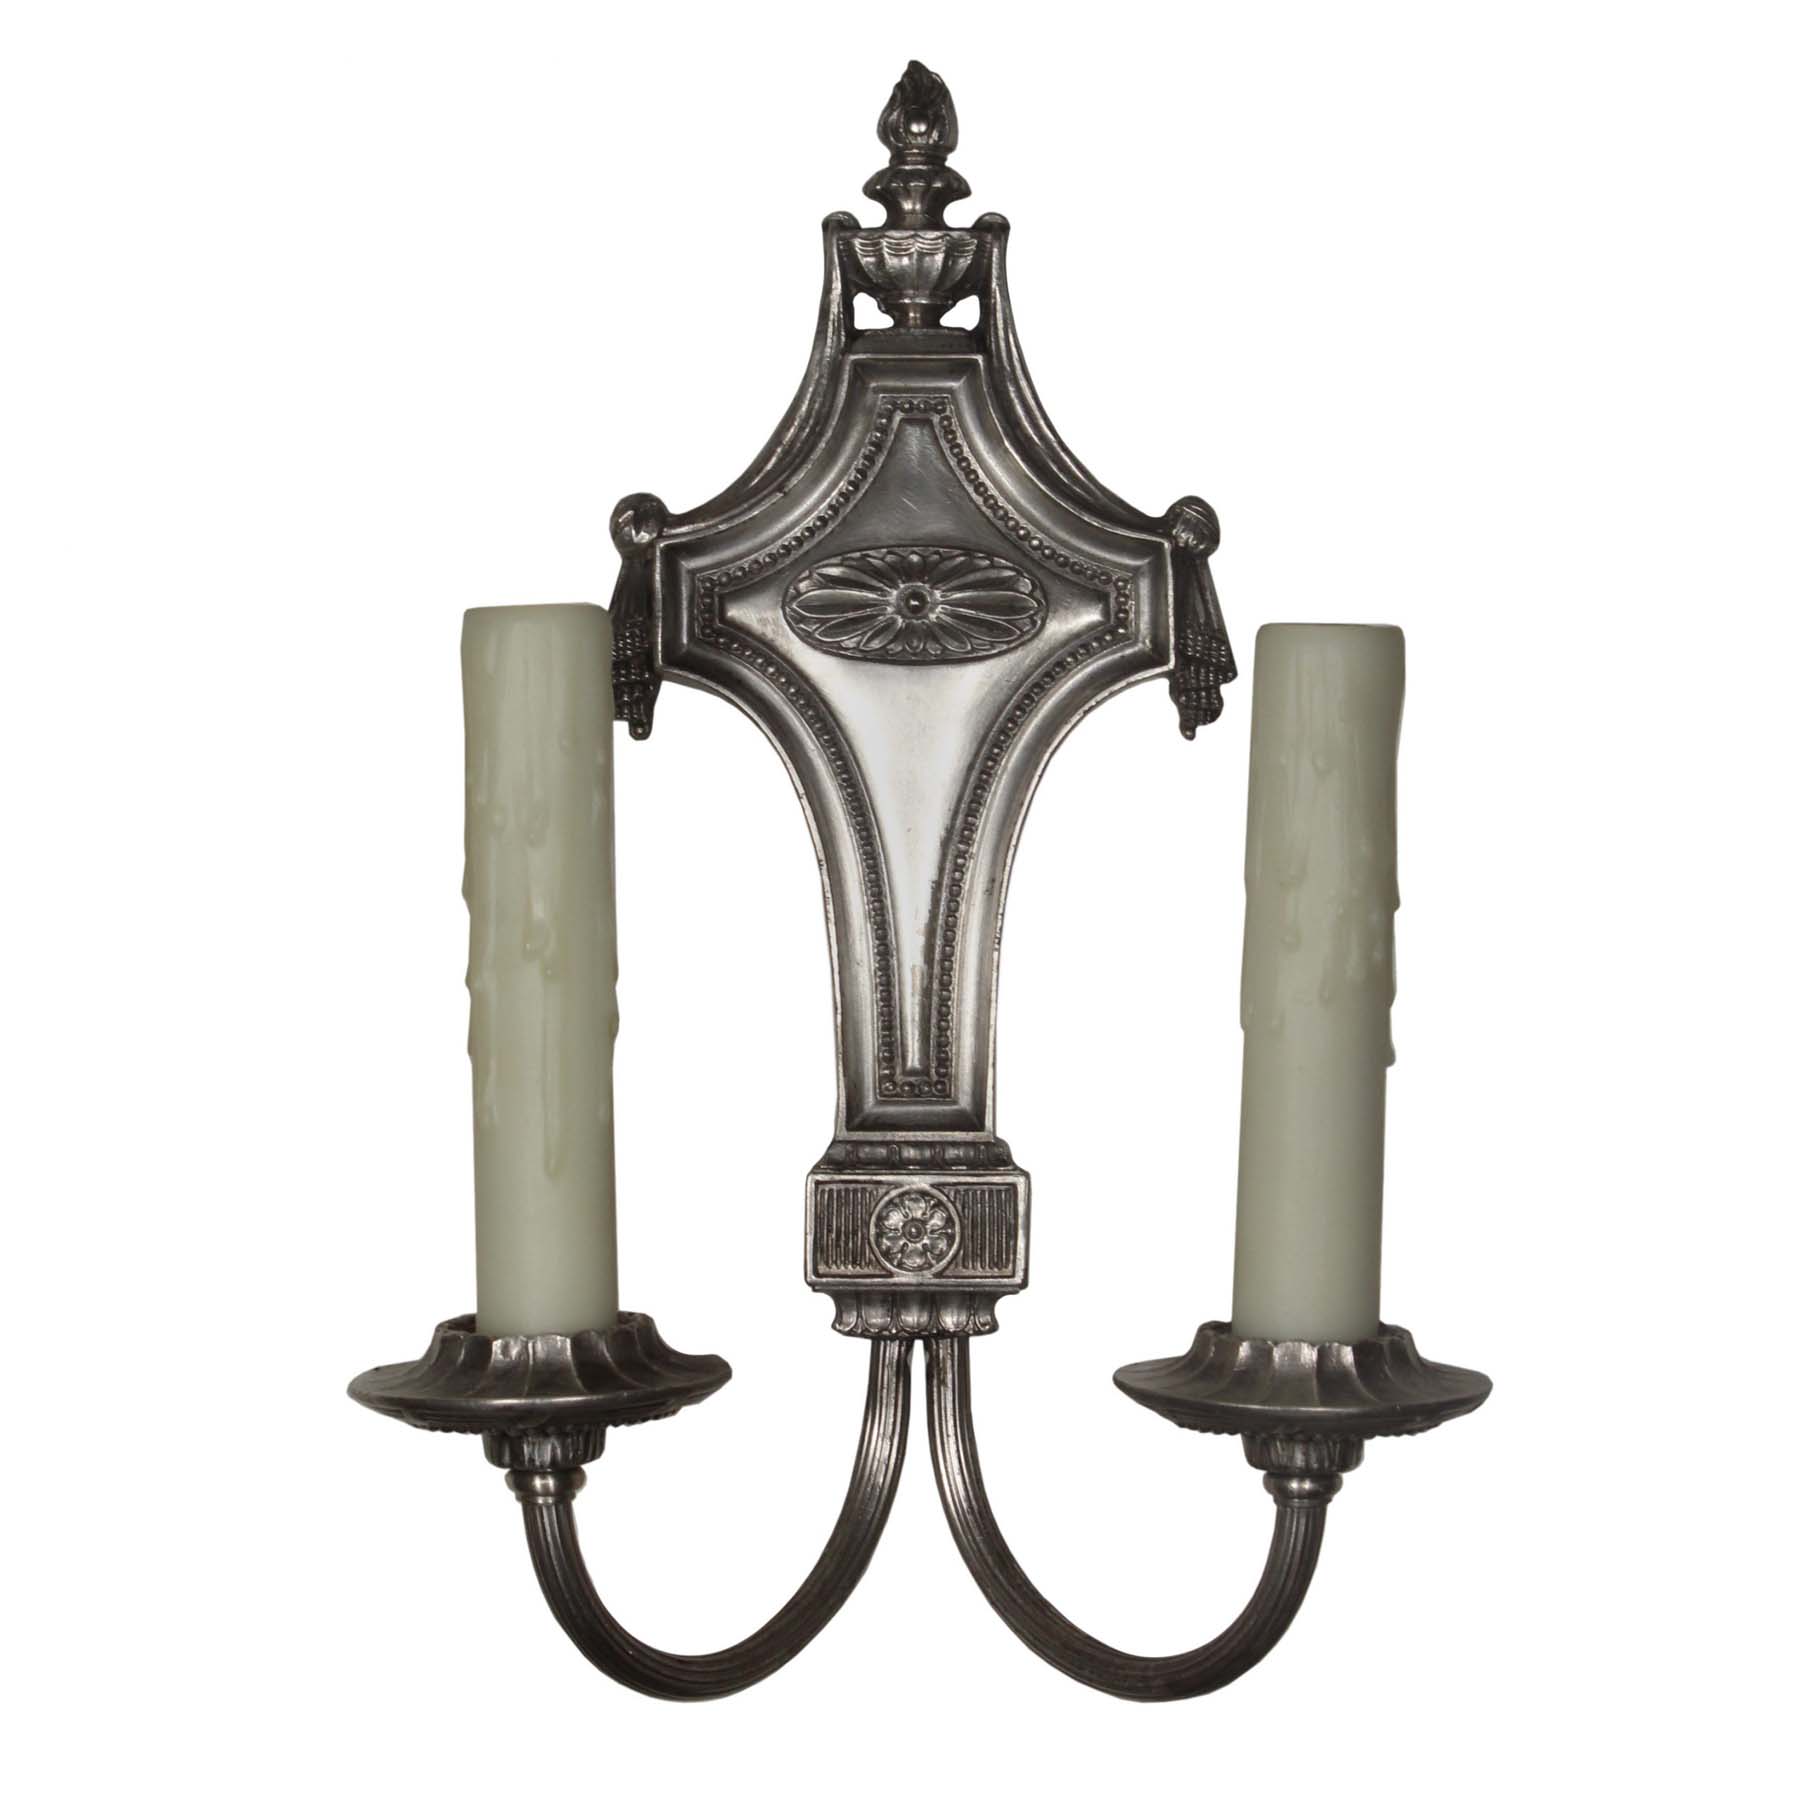 Pair of Antique Double-Arm Georgian Sconces, Silver Plated-67300